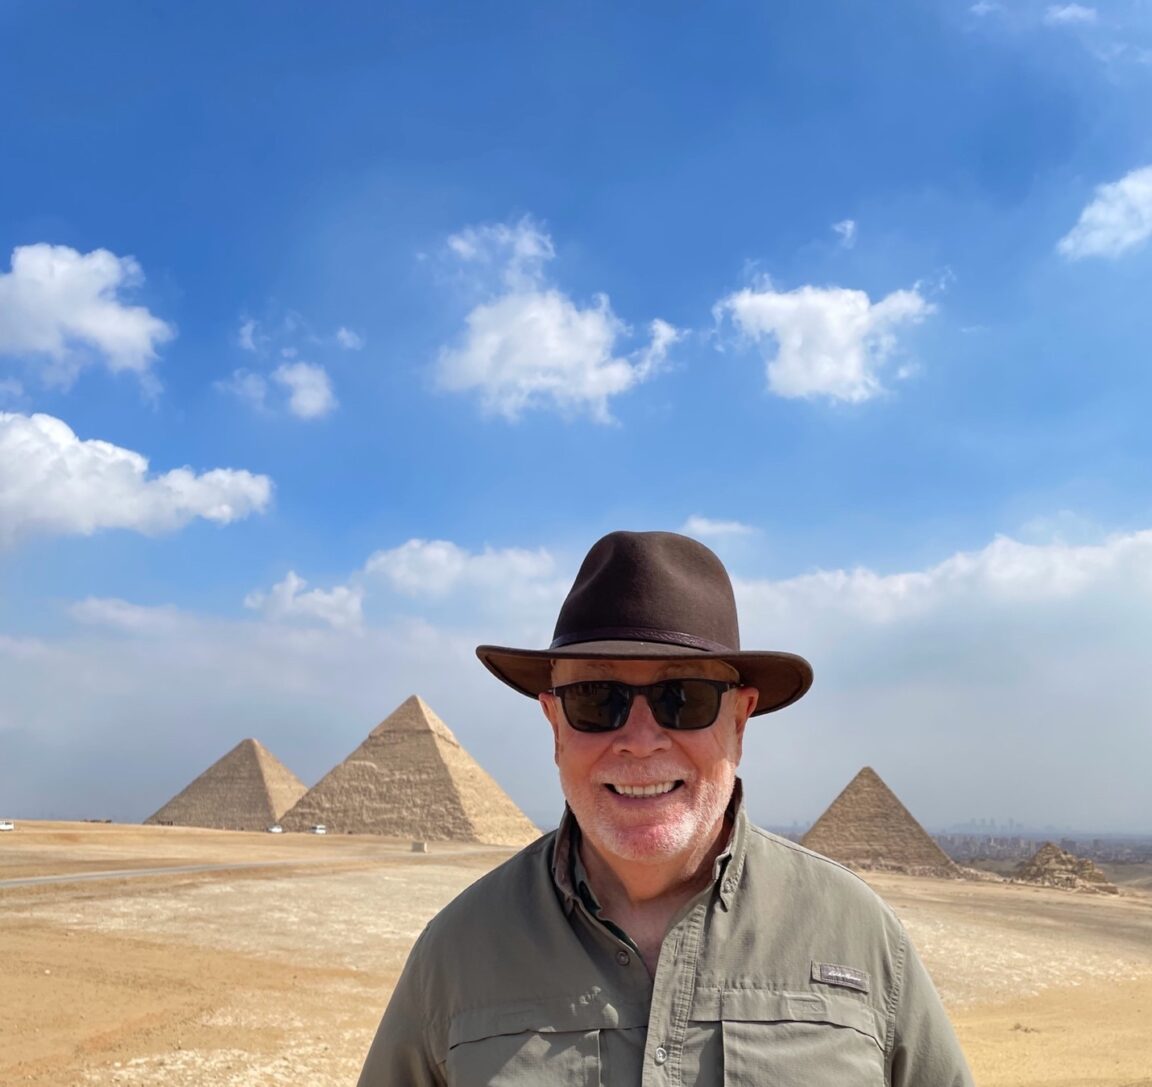 Tom wearing a hat and sunglasses stands in front of pyramids with a blue sky and white clouds in the background